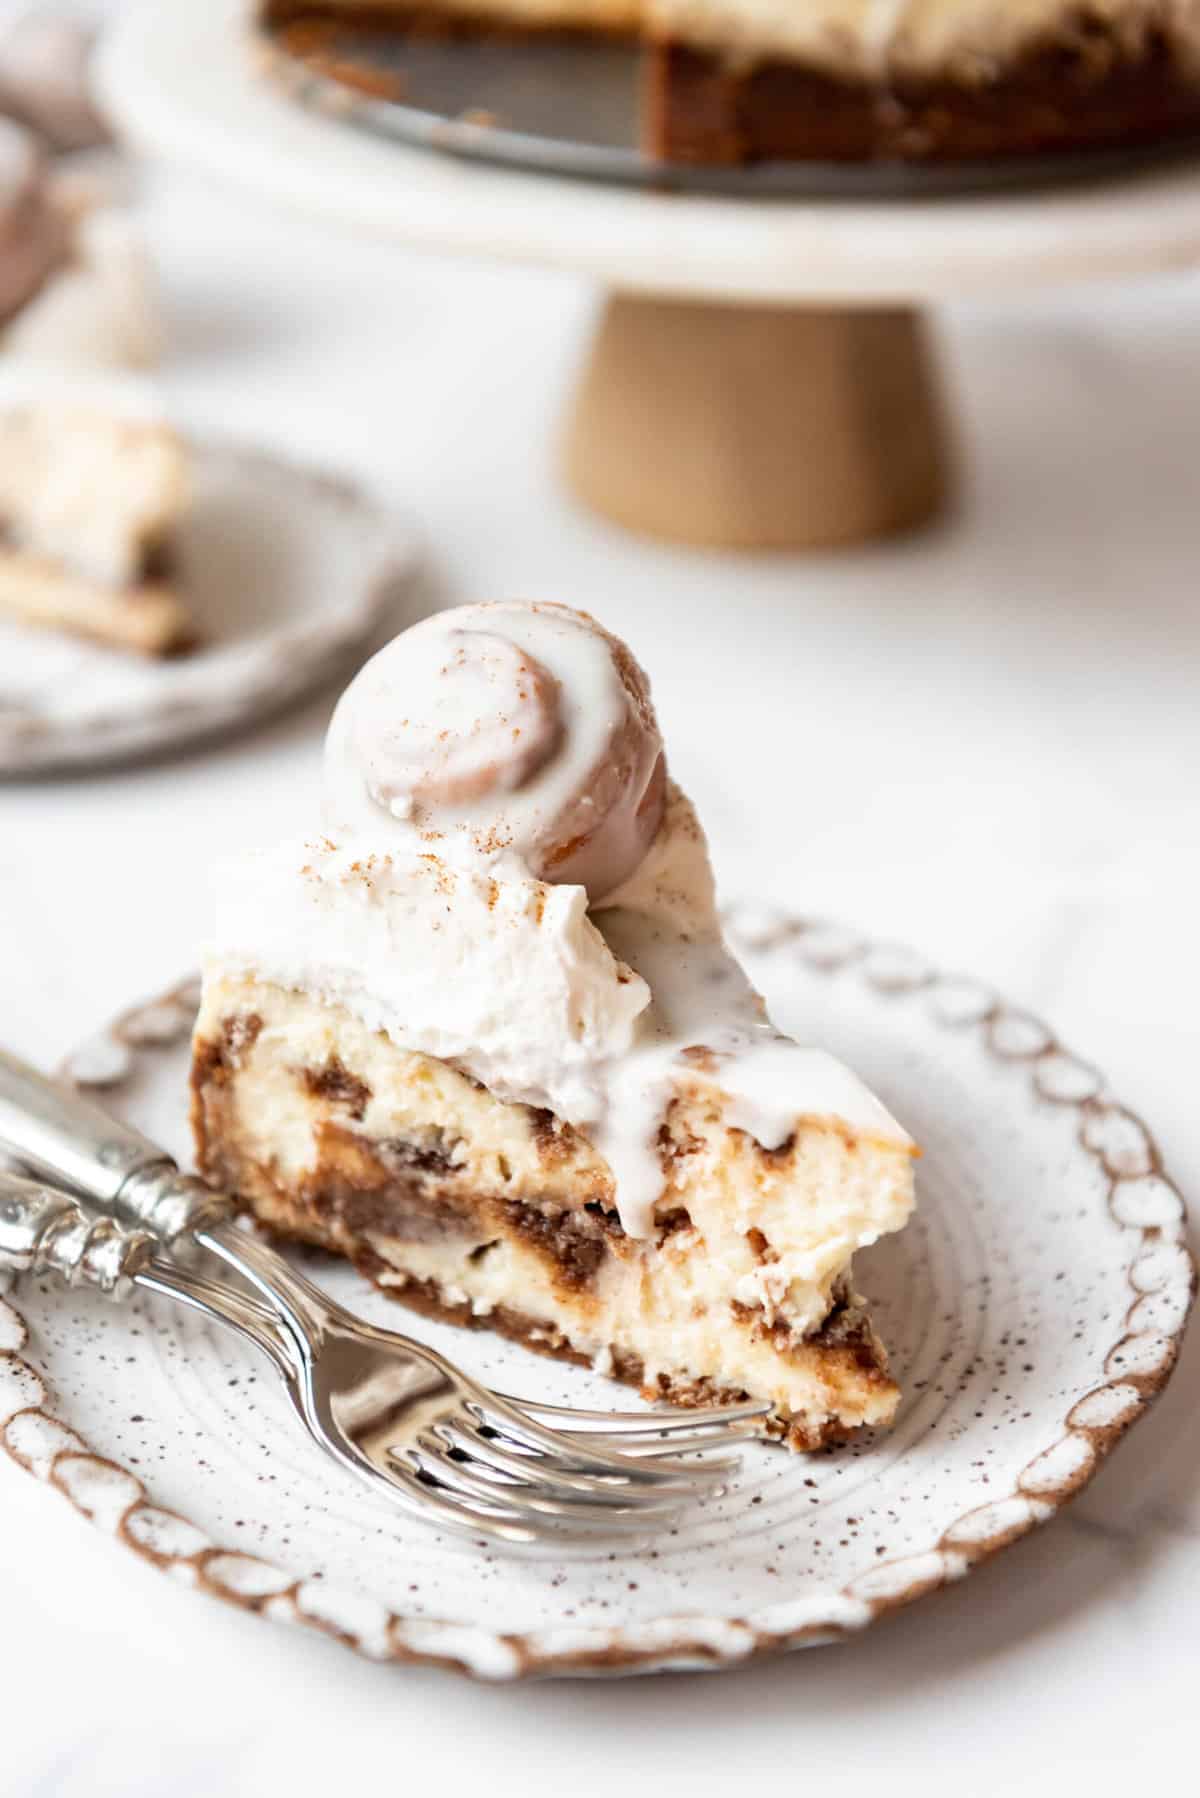 A slice of cinnamon roll cheesecake on a plate with two forks.